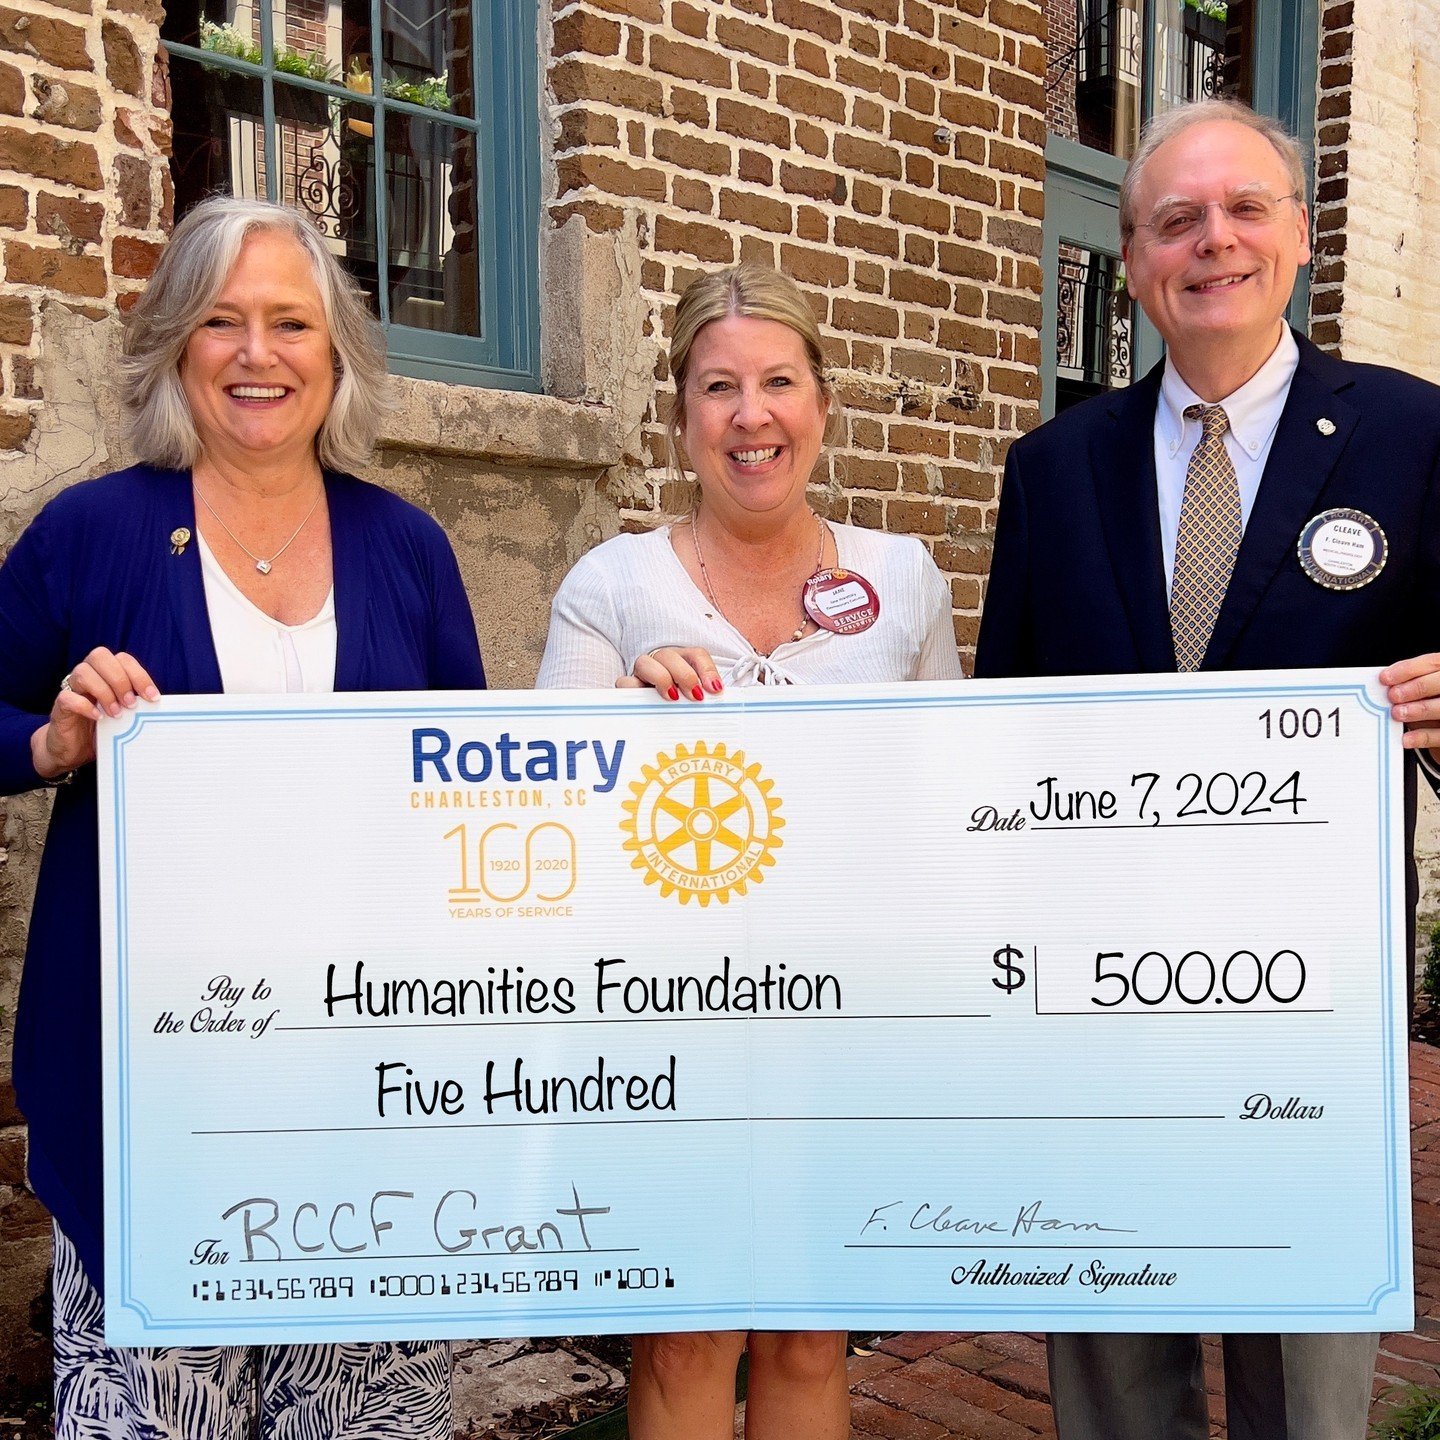 We are so grateful for the support of the Rotary Club of Charleston for their grant of $500.00 to support the Archer School Apartments Computer lab. 

Image 1: Sandy Morckel (past Rotary Club of Charleston President and grant sponsor) and Cleave Ham 